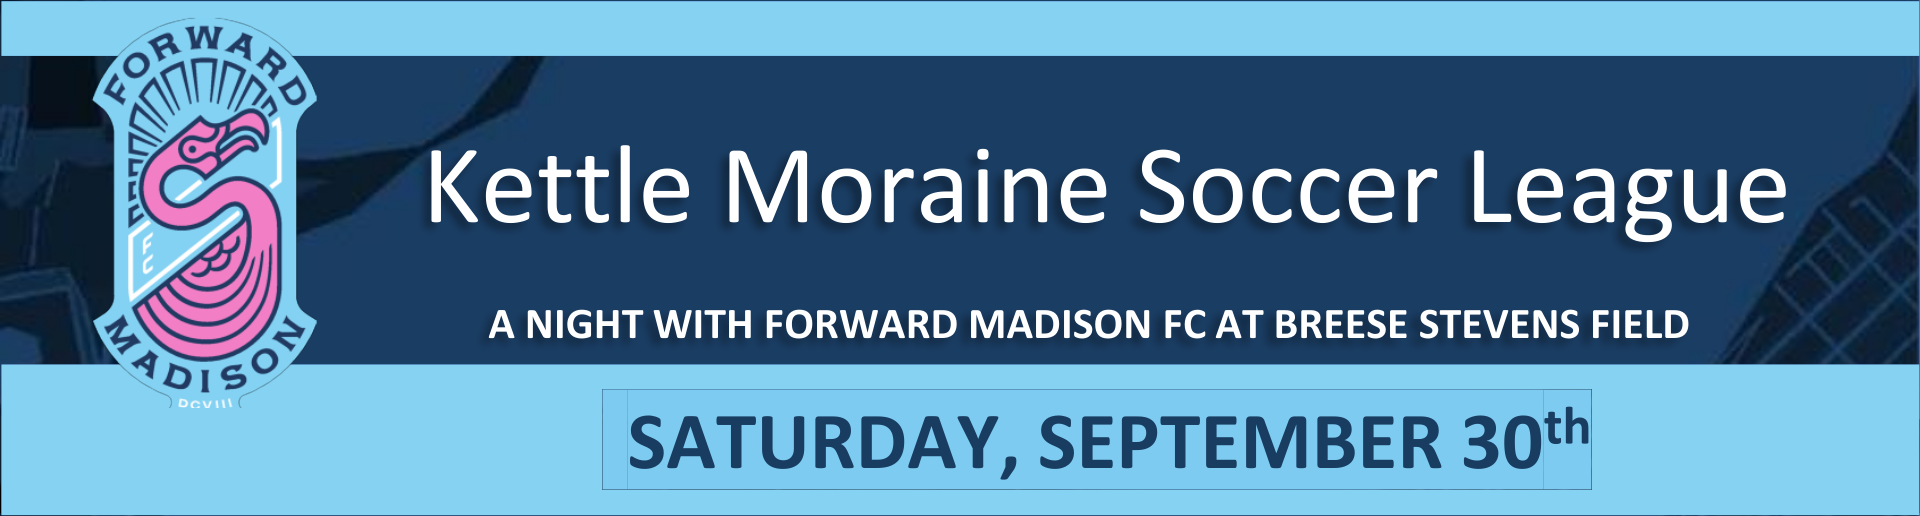 KMSL Night with Forward Madison FC